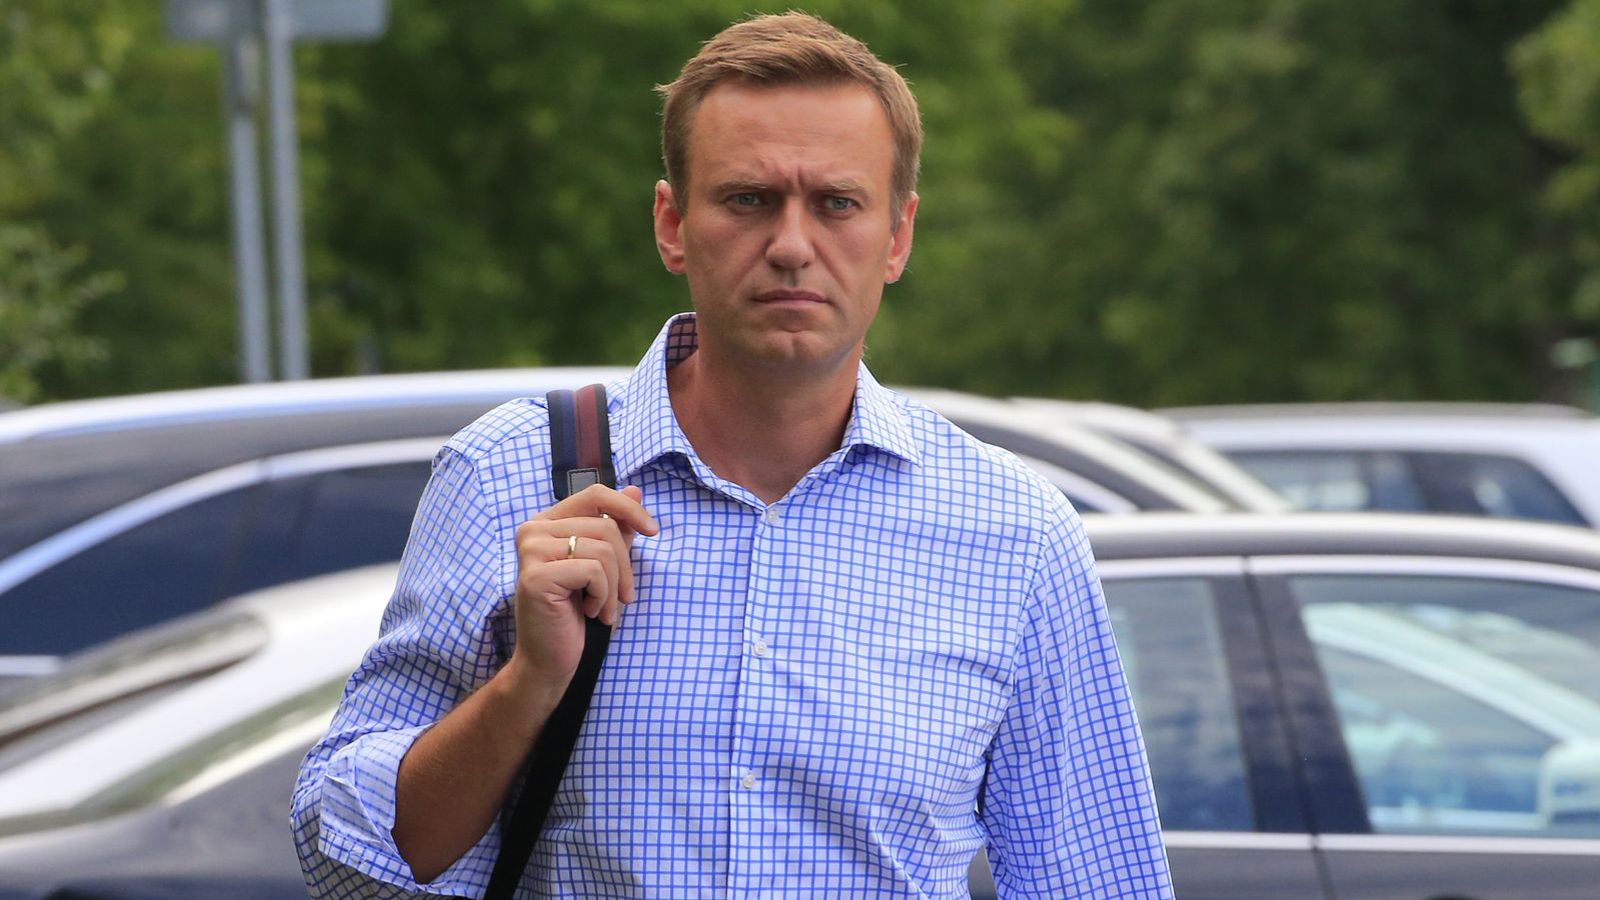 alexei-navalny-poisoning-putin-critic-can-talk-again-as-police-protection-stepped-up-world-news-sky-news